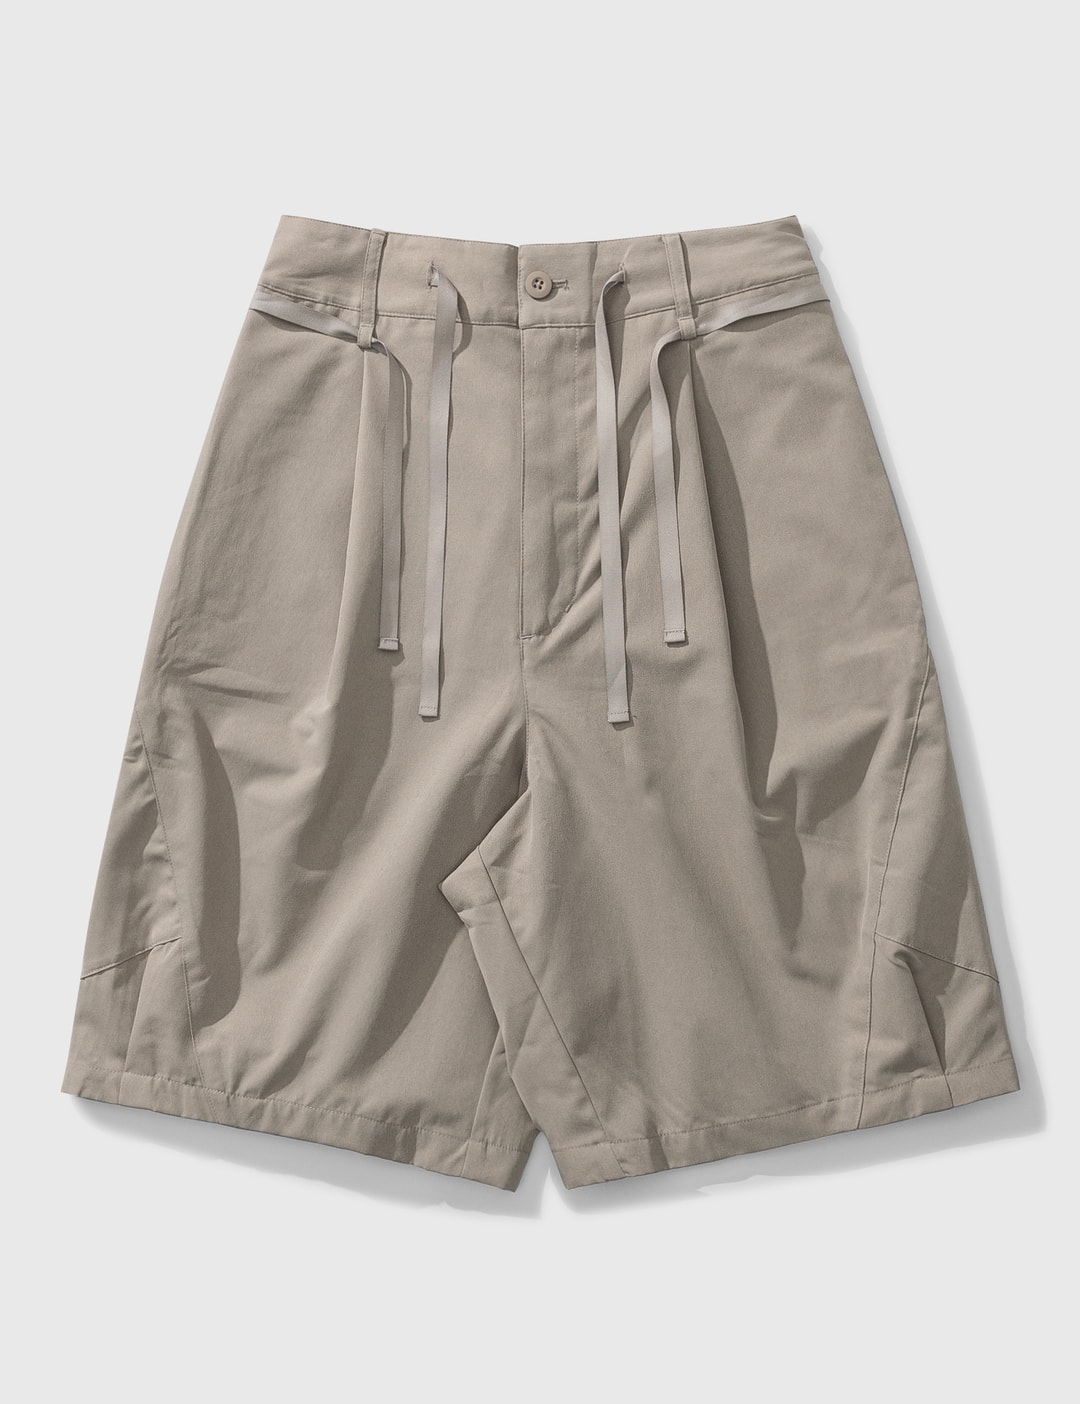 Melsign - Double Drawstring Shorts | HBX - Globally Curated Fashion and ...